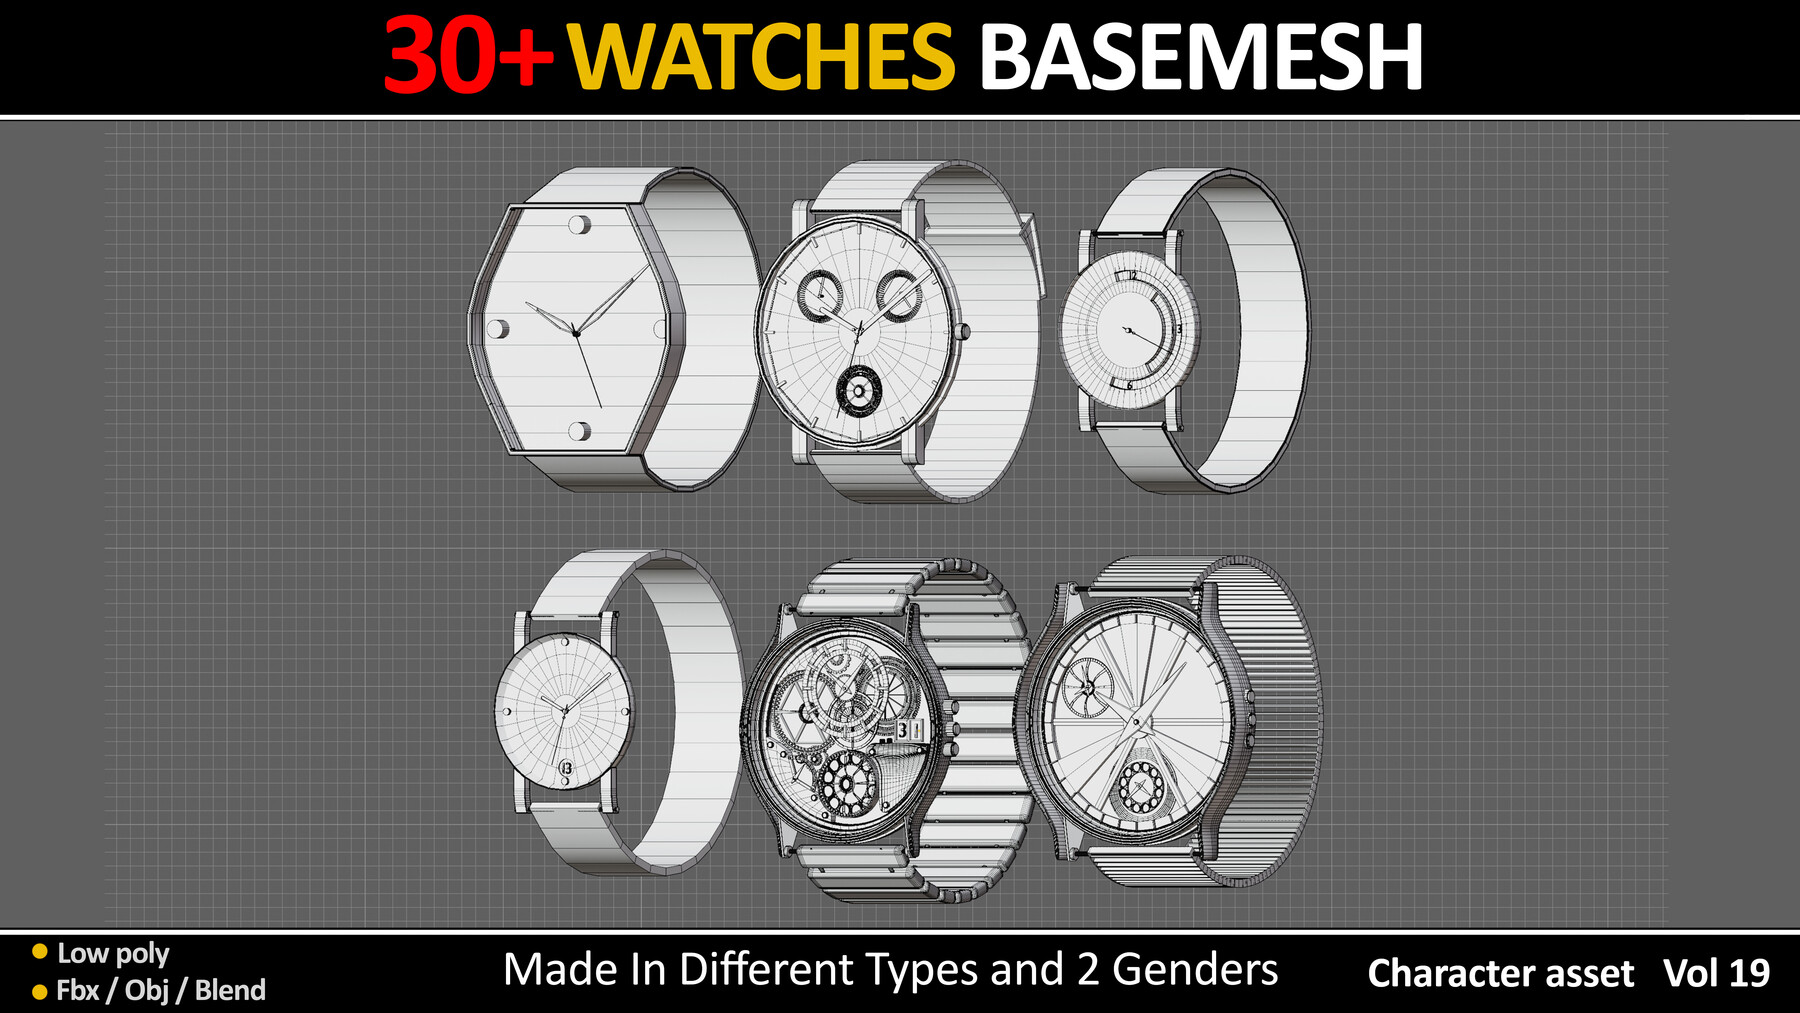 ArtStation - 30+ WATCHES BASEMESH MADE IN DIFFERENT TYPES VOL 19 | Game ...